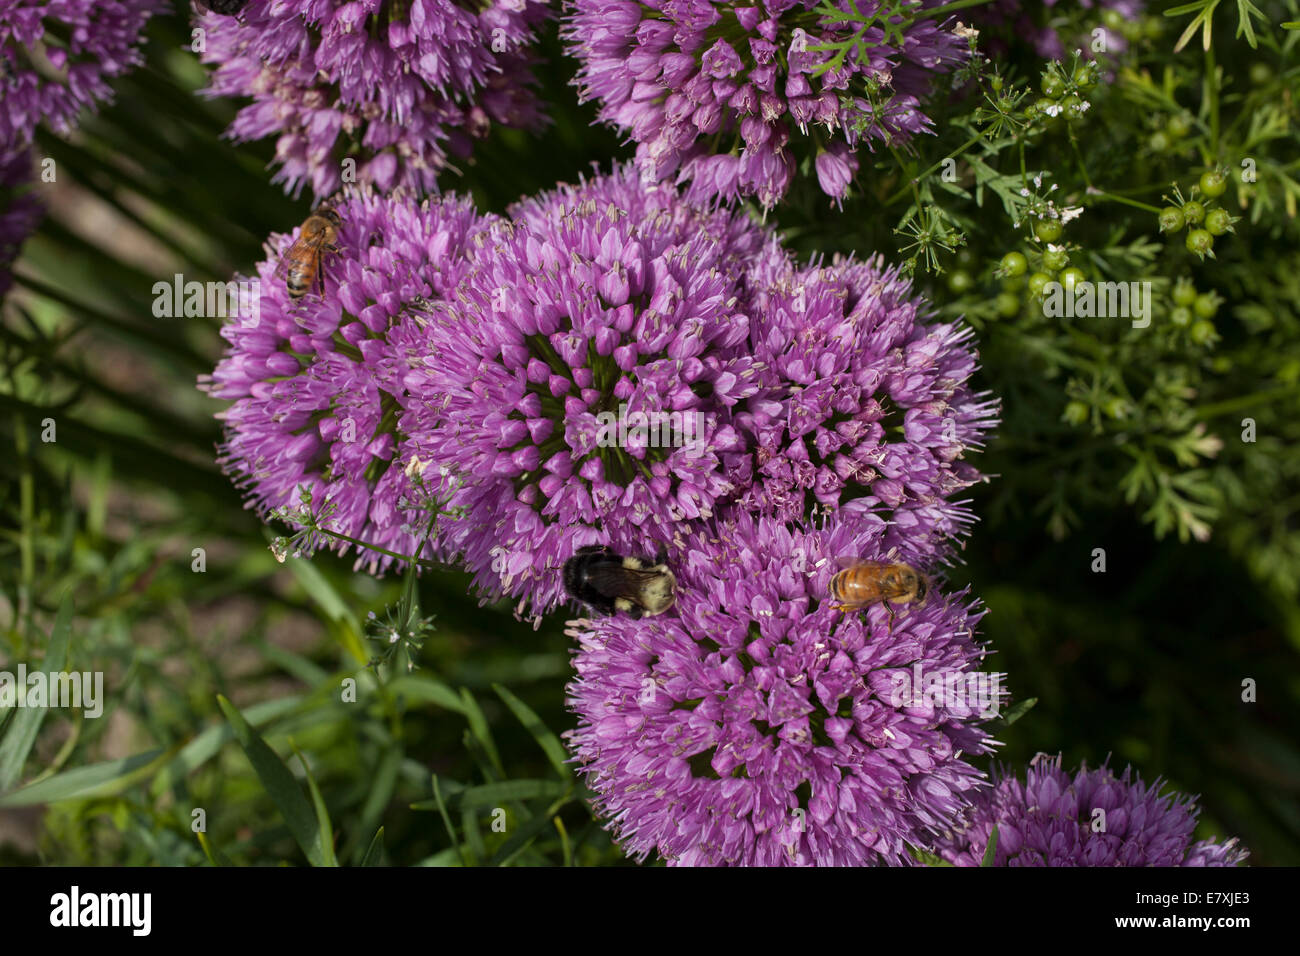 Chive and coriander blossoms are visited by honey bees and bumble bees. Stock Photo